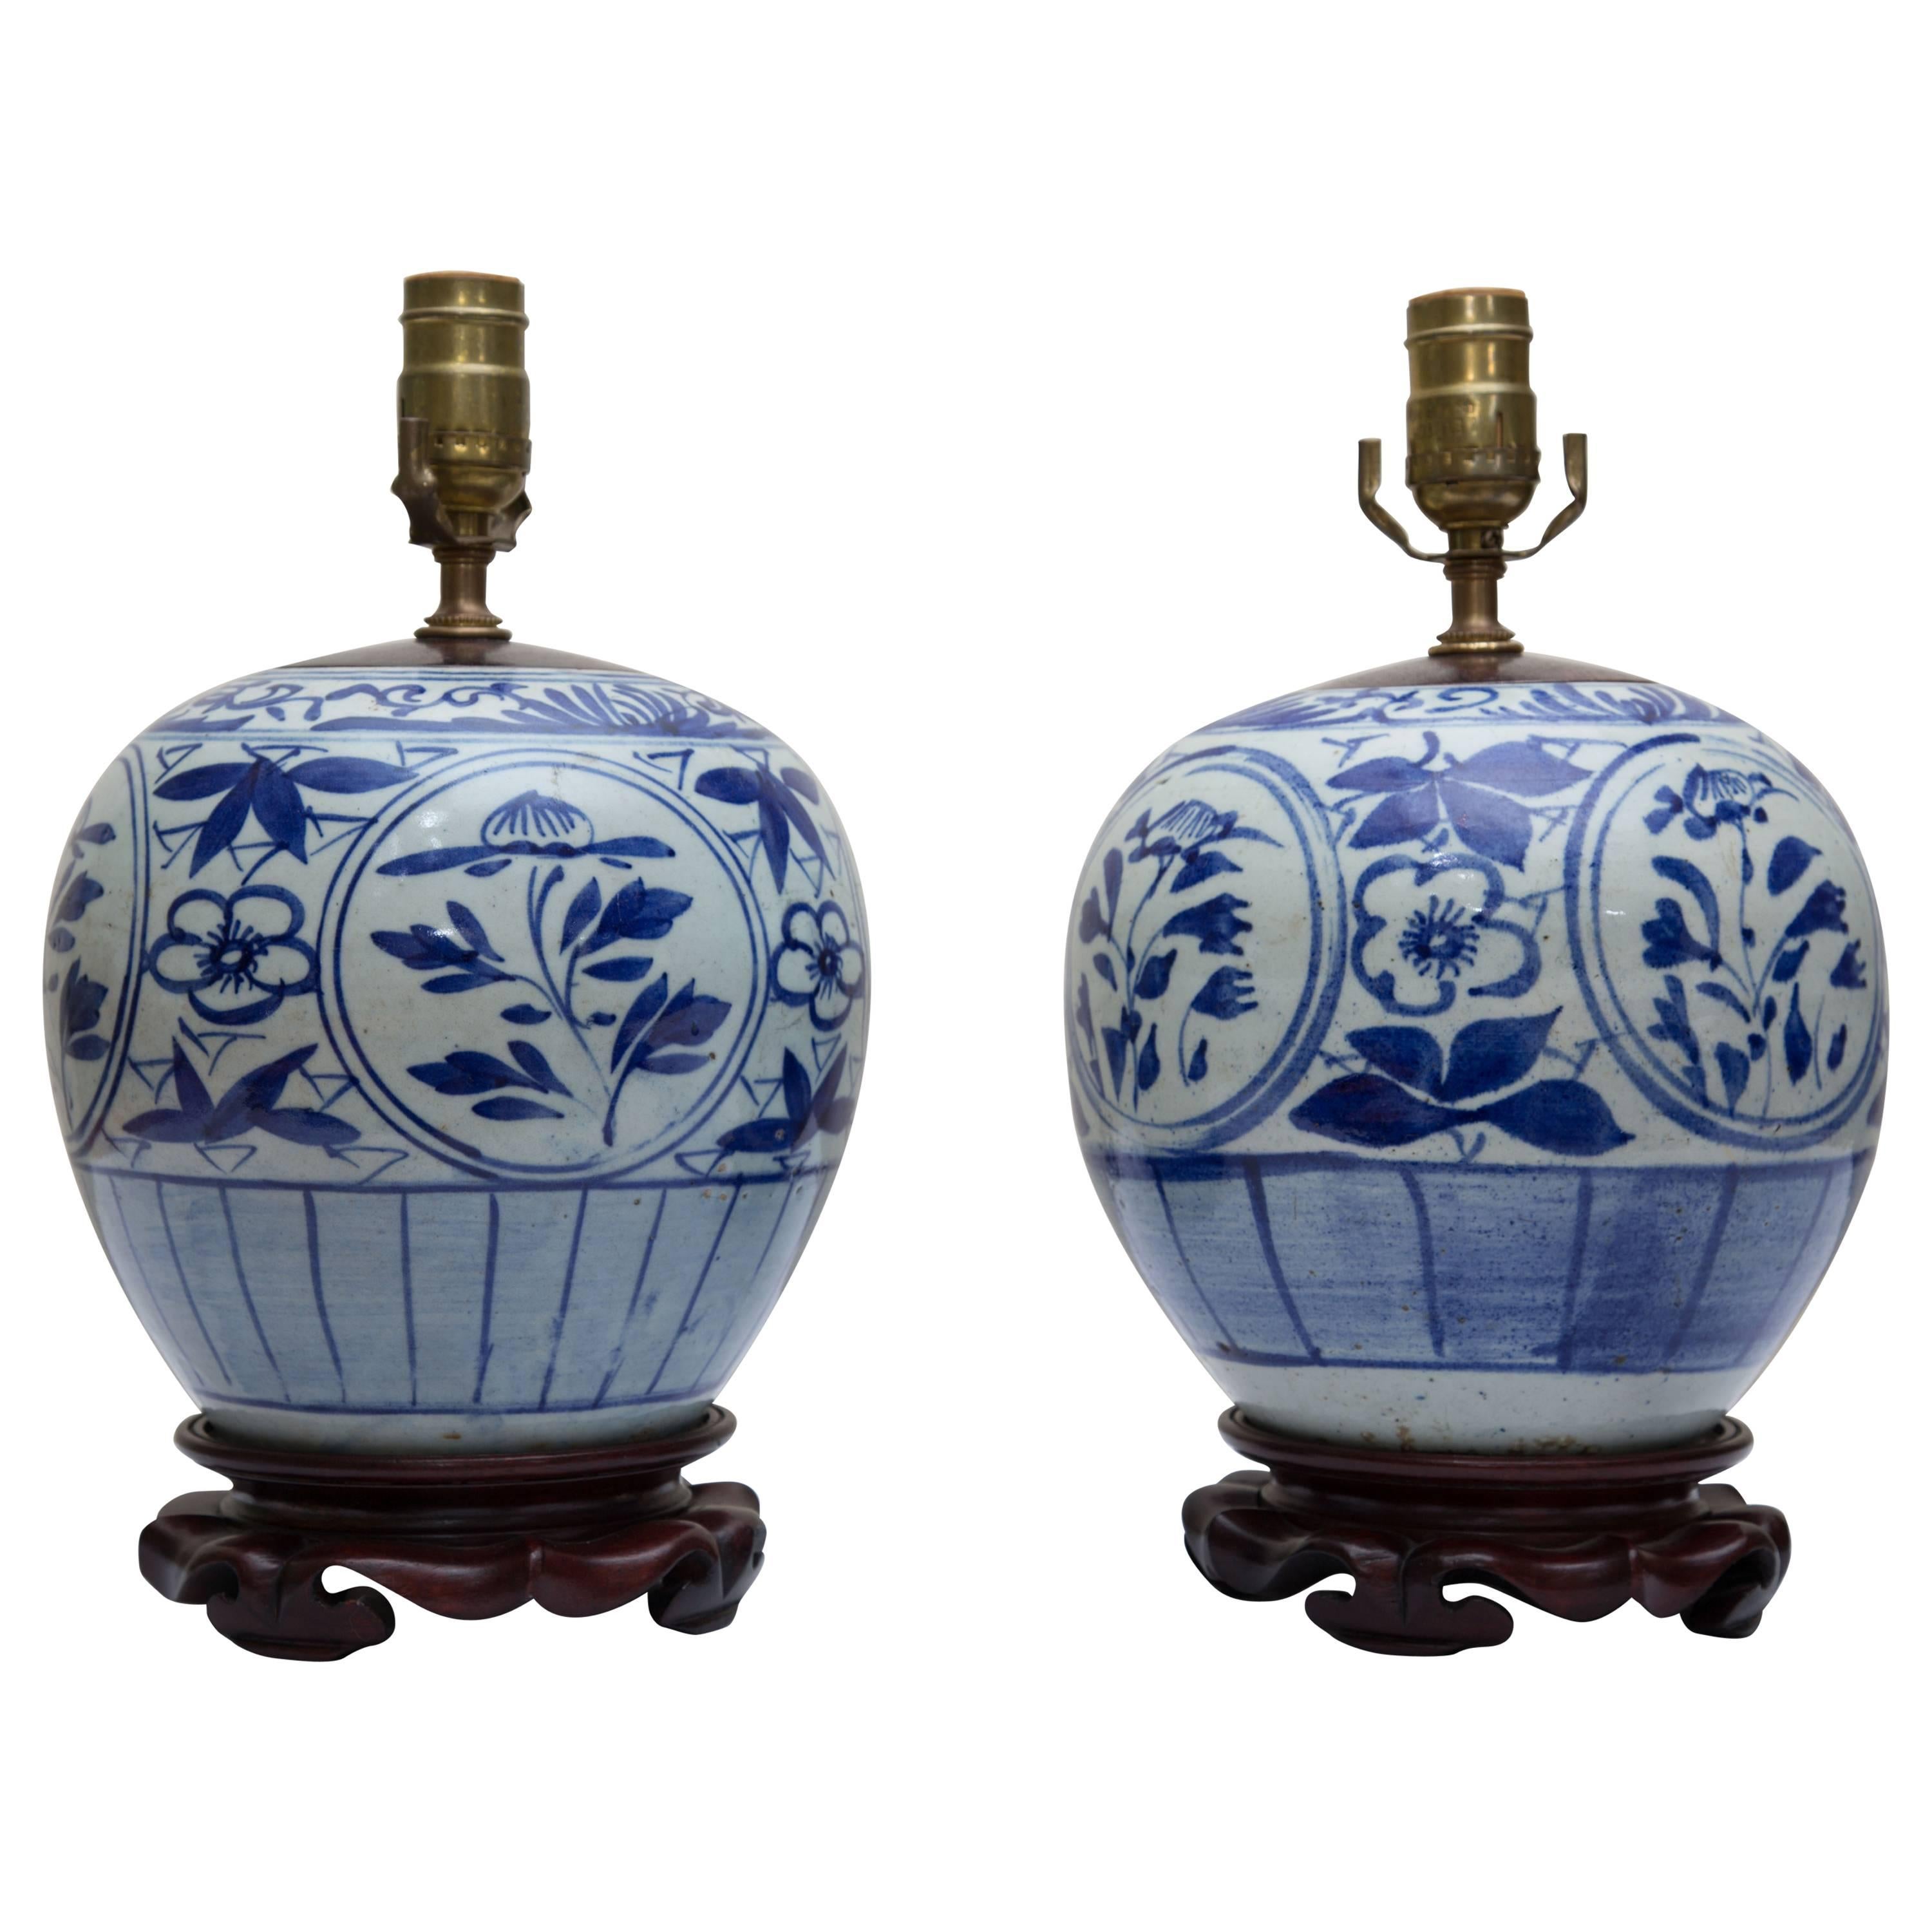 Late 19th Century Pair of Blue and White Melon Jars as Lamps